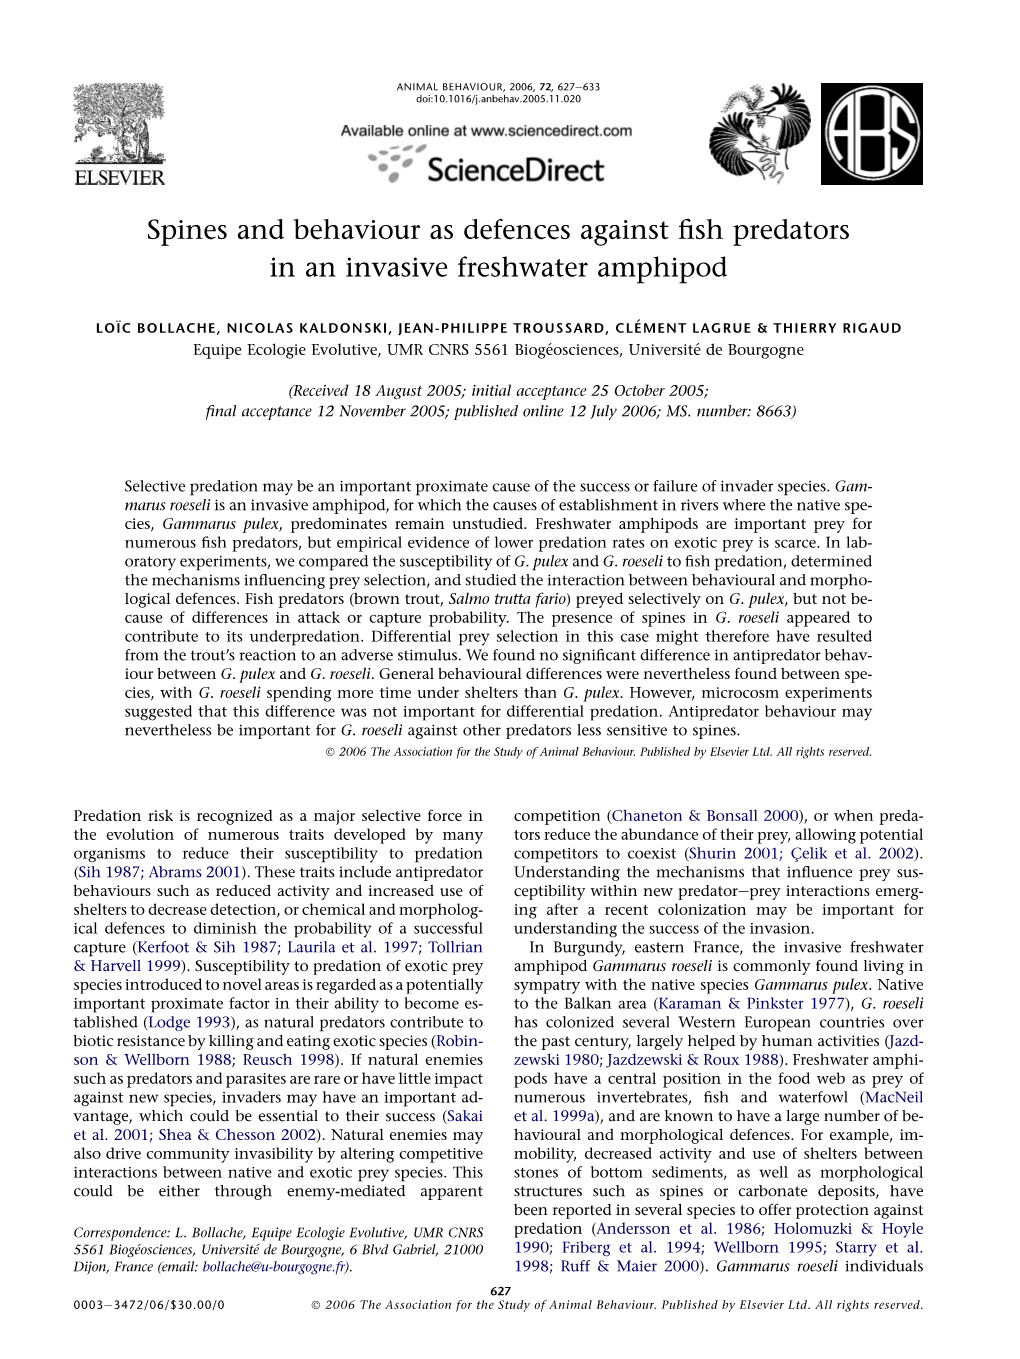 Spines and Behaviour As Defences Against Fish Predators in an Invasive